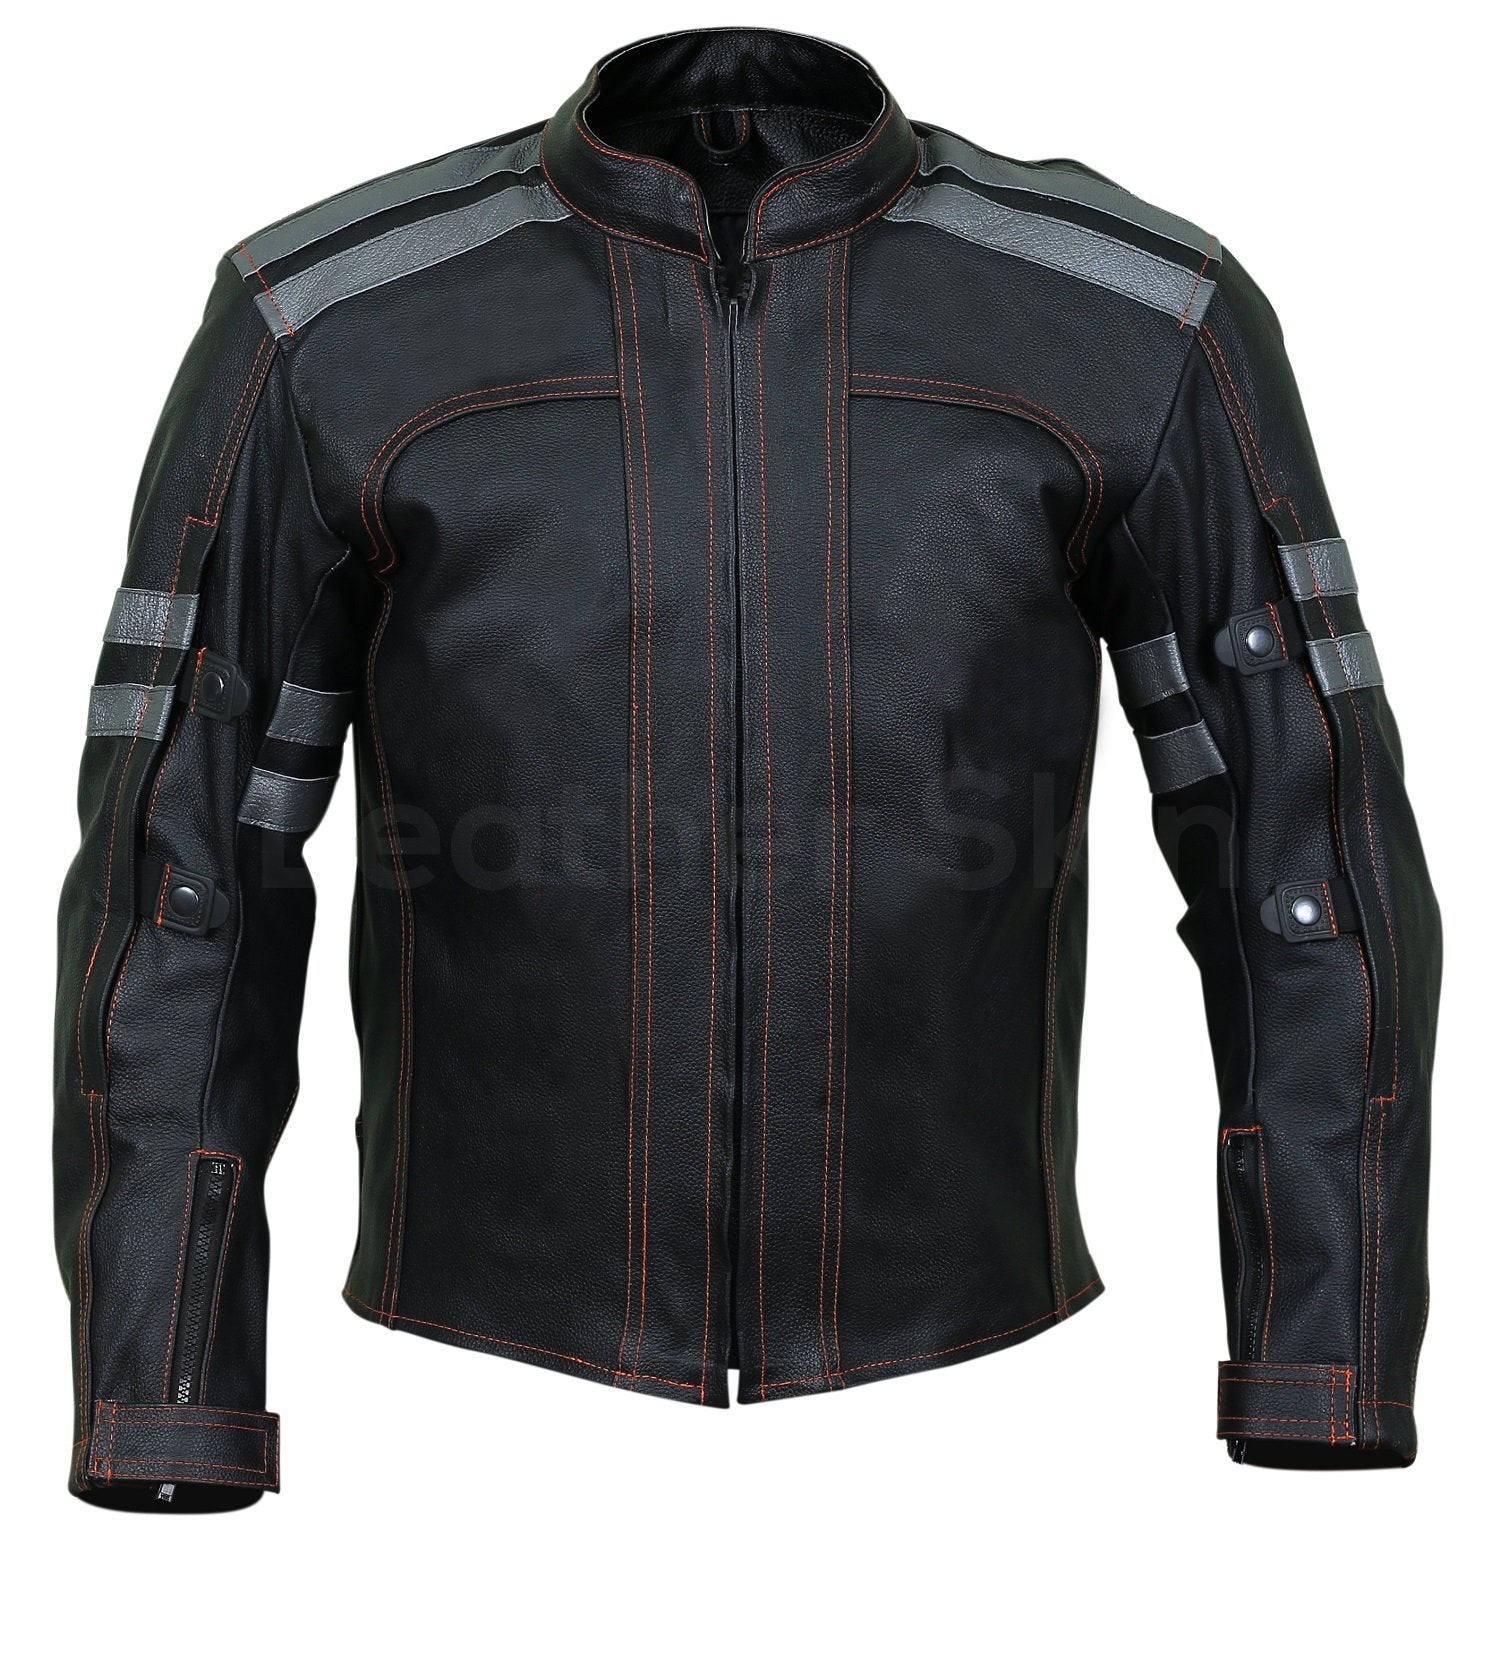 Men Black Motorcycle Biker Leather Jacket with Red Stitching